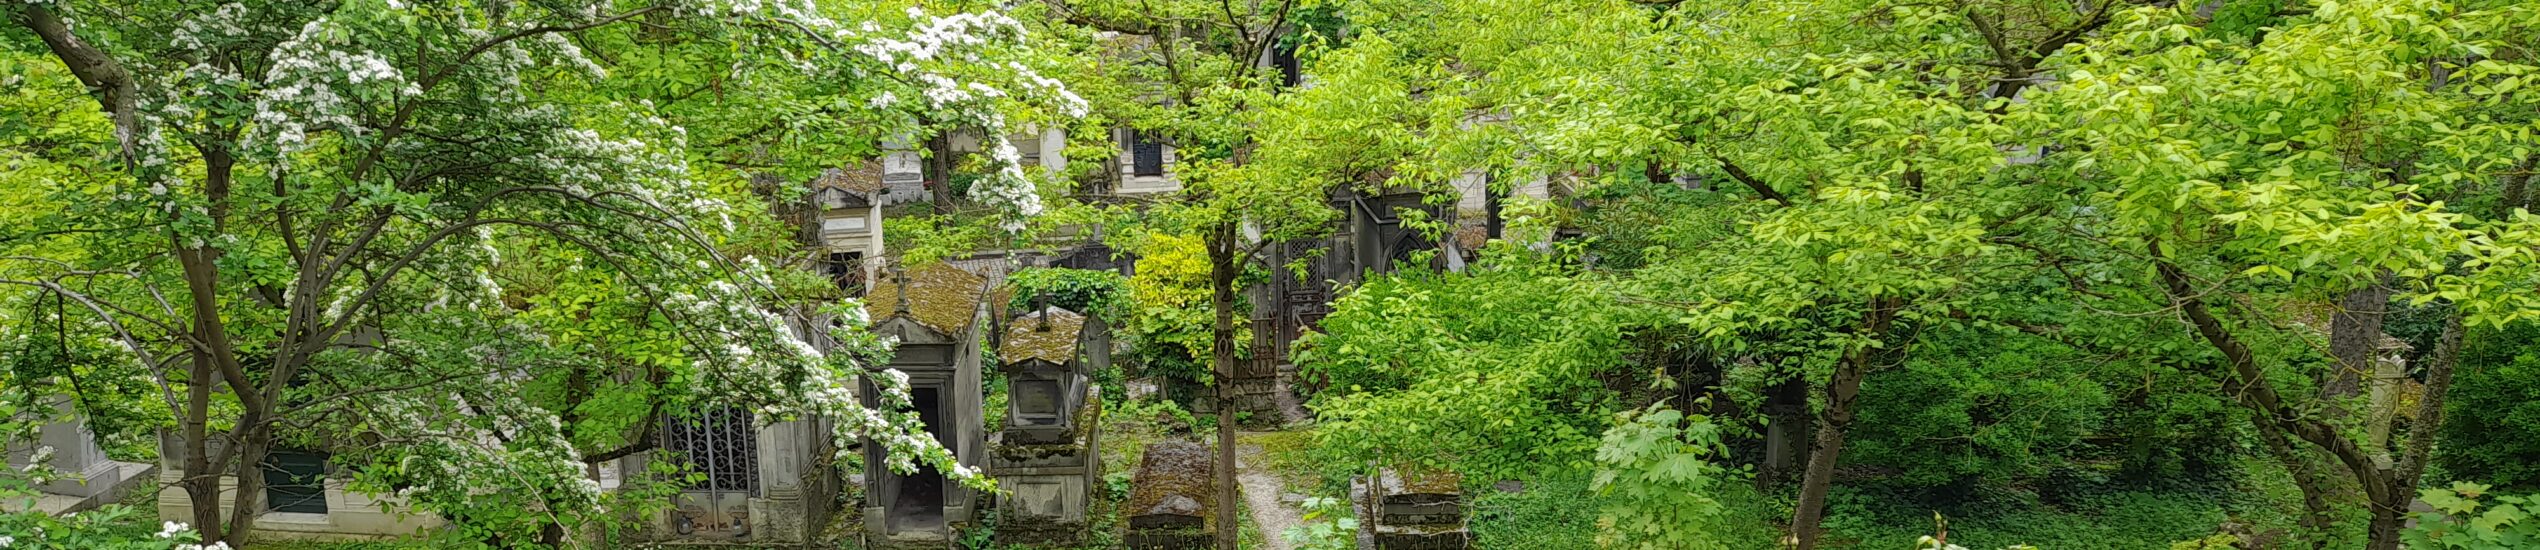 activites-saint-nicaise-visite-guidee-pere-lachaise-